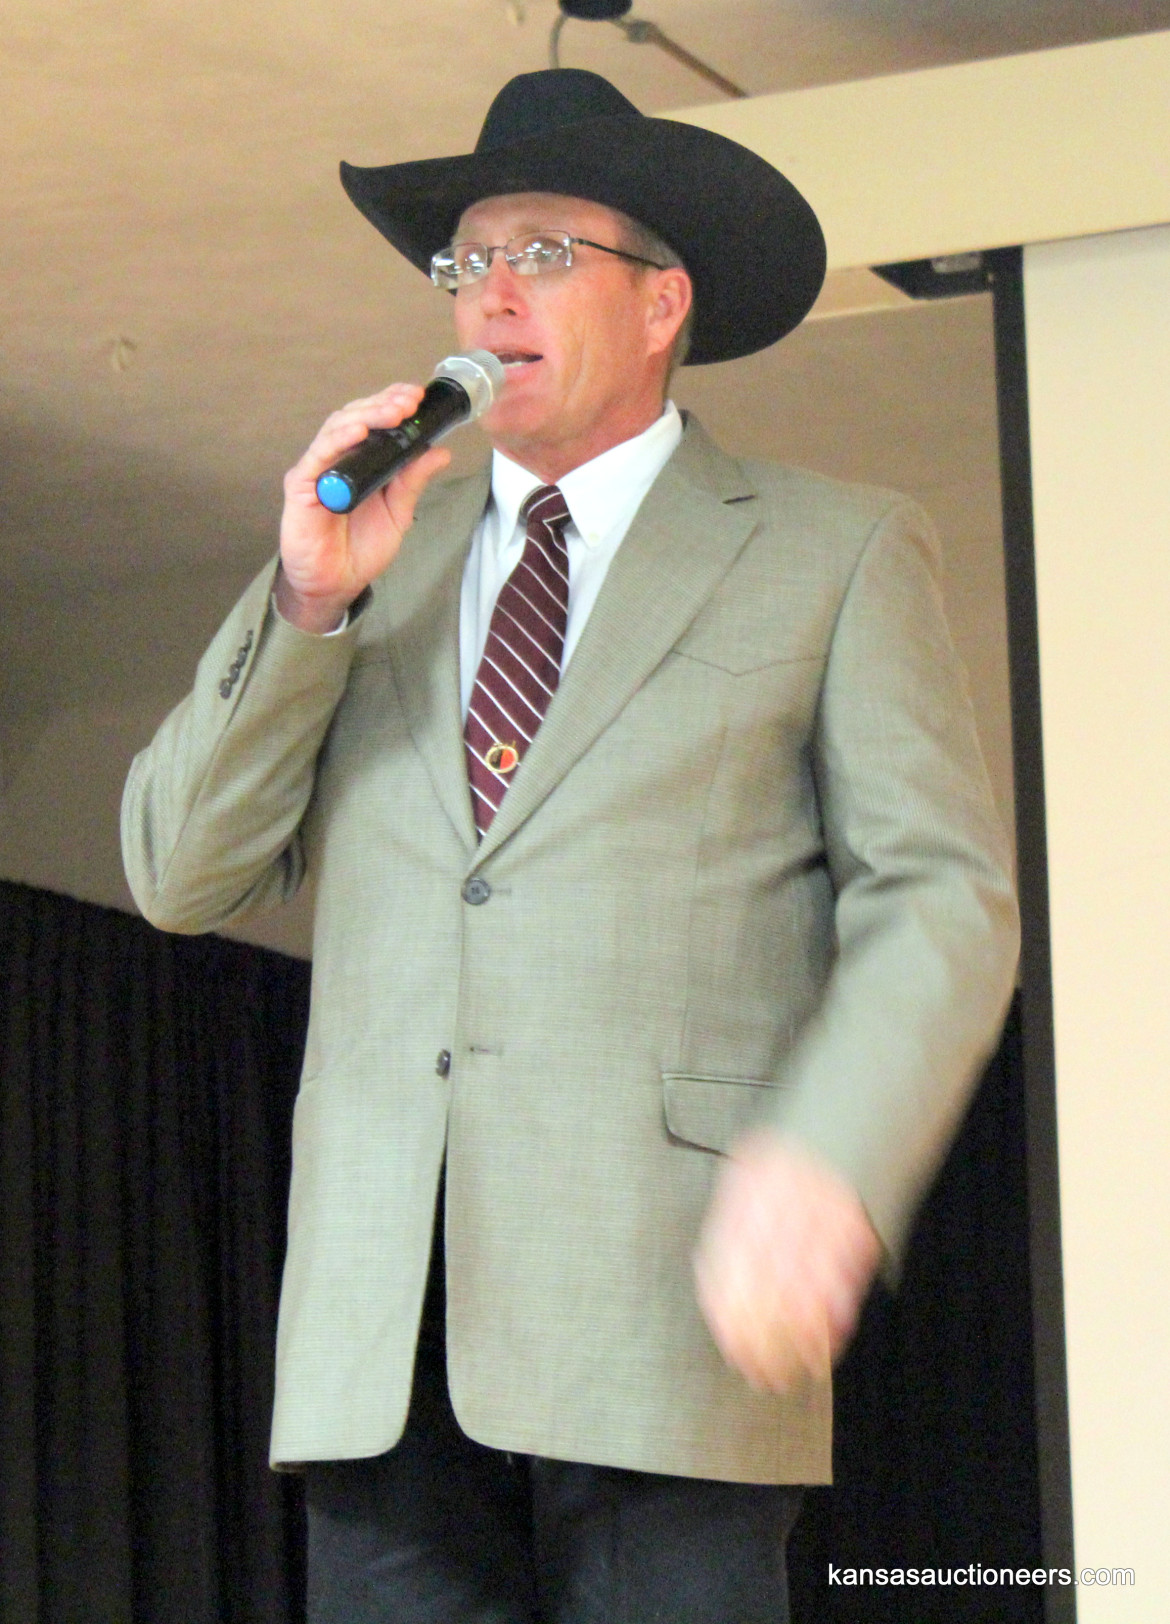 Justin Banzhaf competing in the 2016 Kansas Auctioneer Preliminaries.